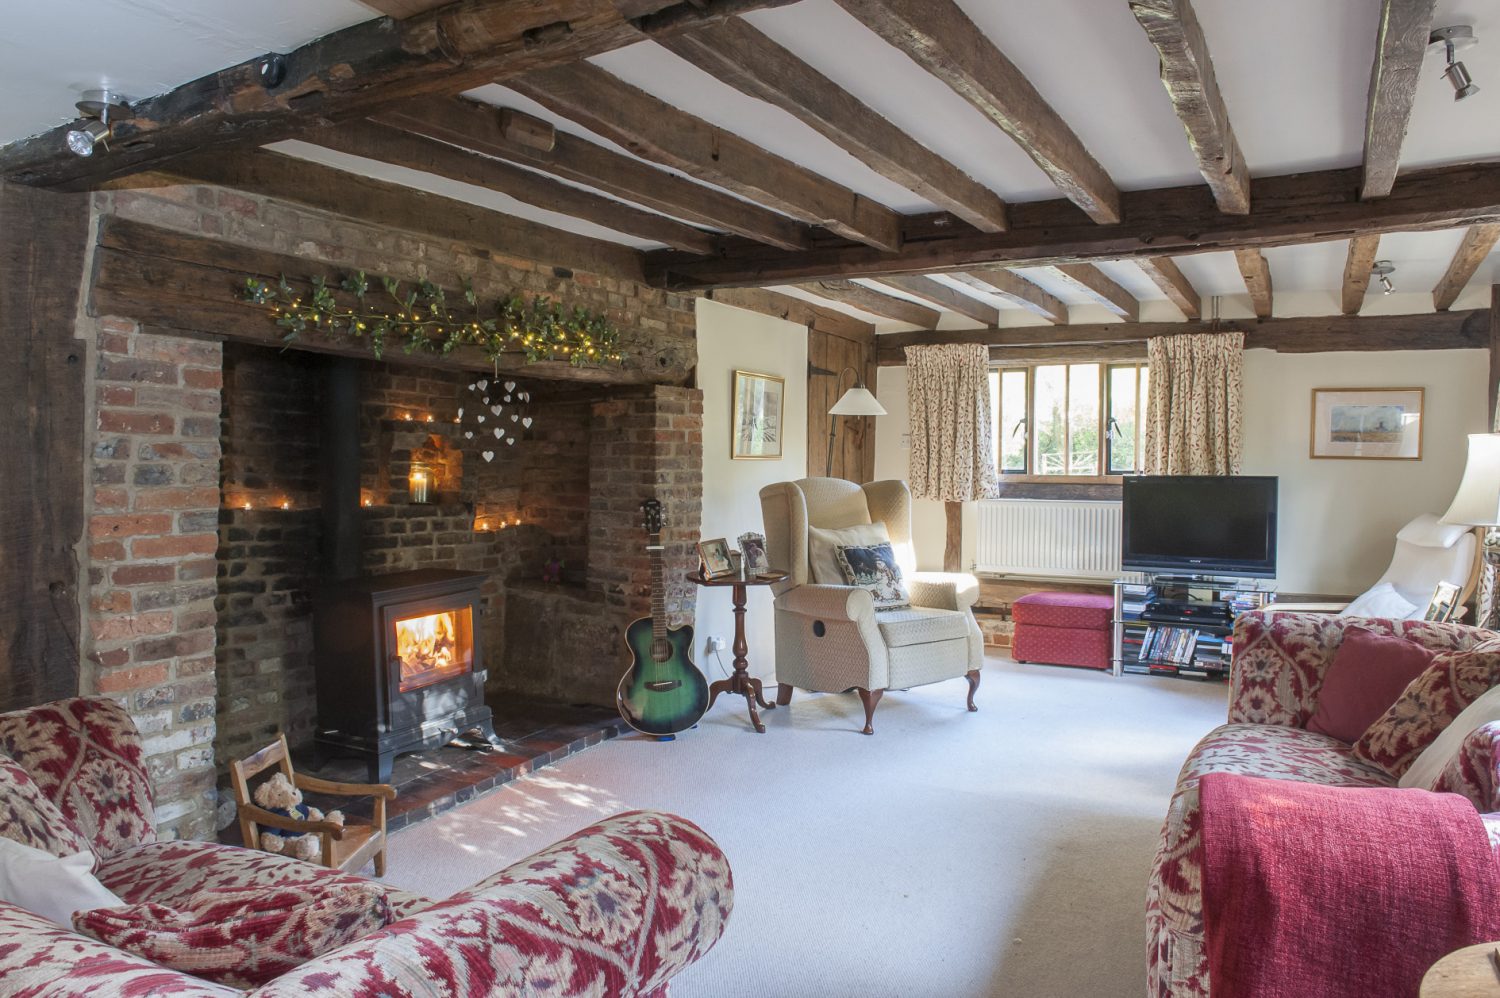 In the sitting room, the second inglenook fireplace shows clearly where the floor has been lowered. Two comfortable tapestry sofas in rich plum tones, complement delicately patterned curtains made by Bell House Fabrics